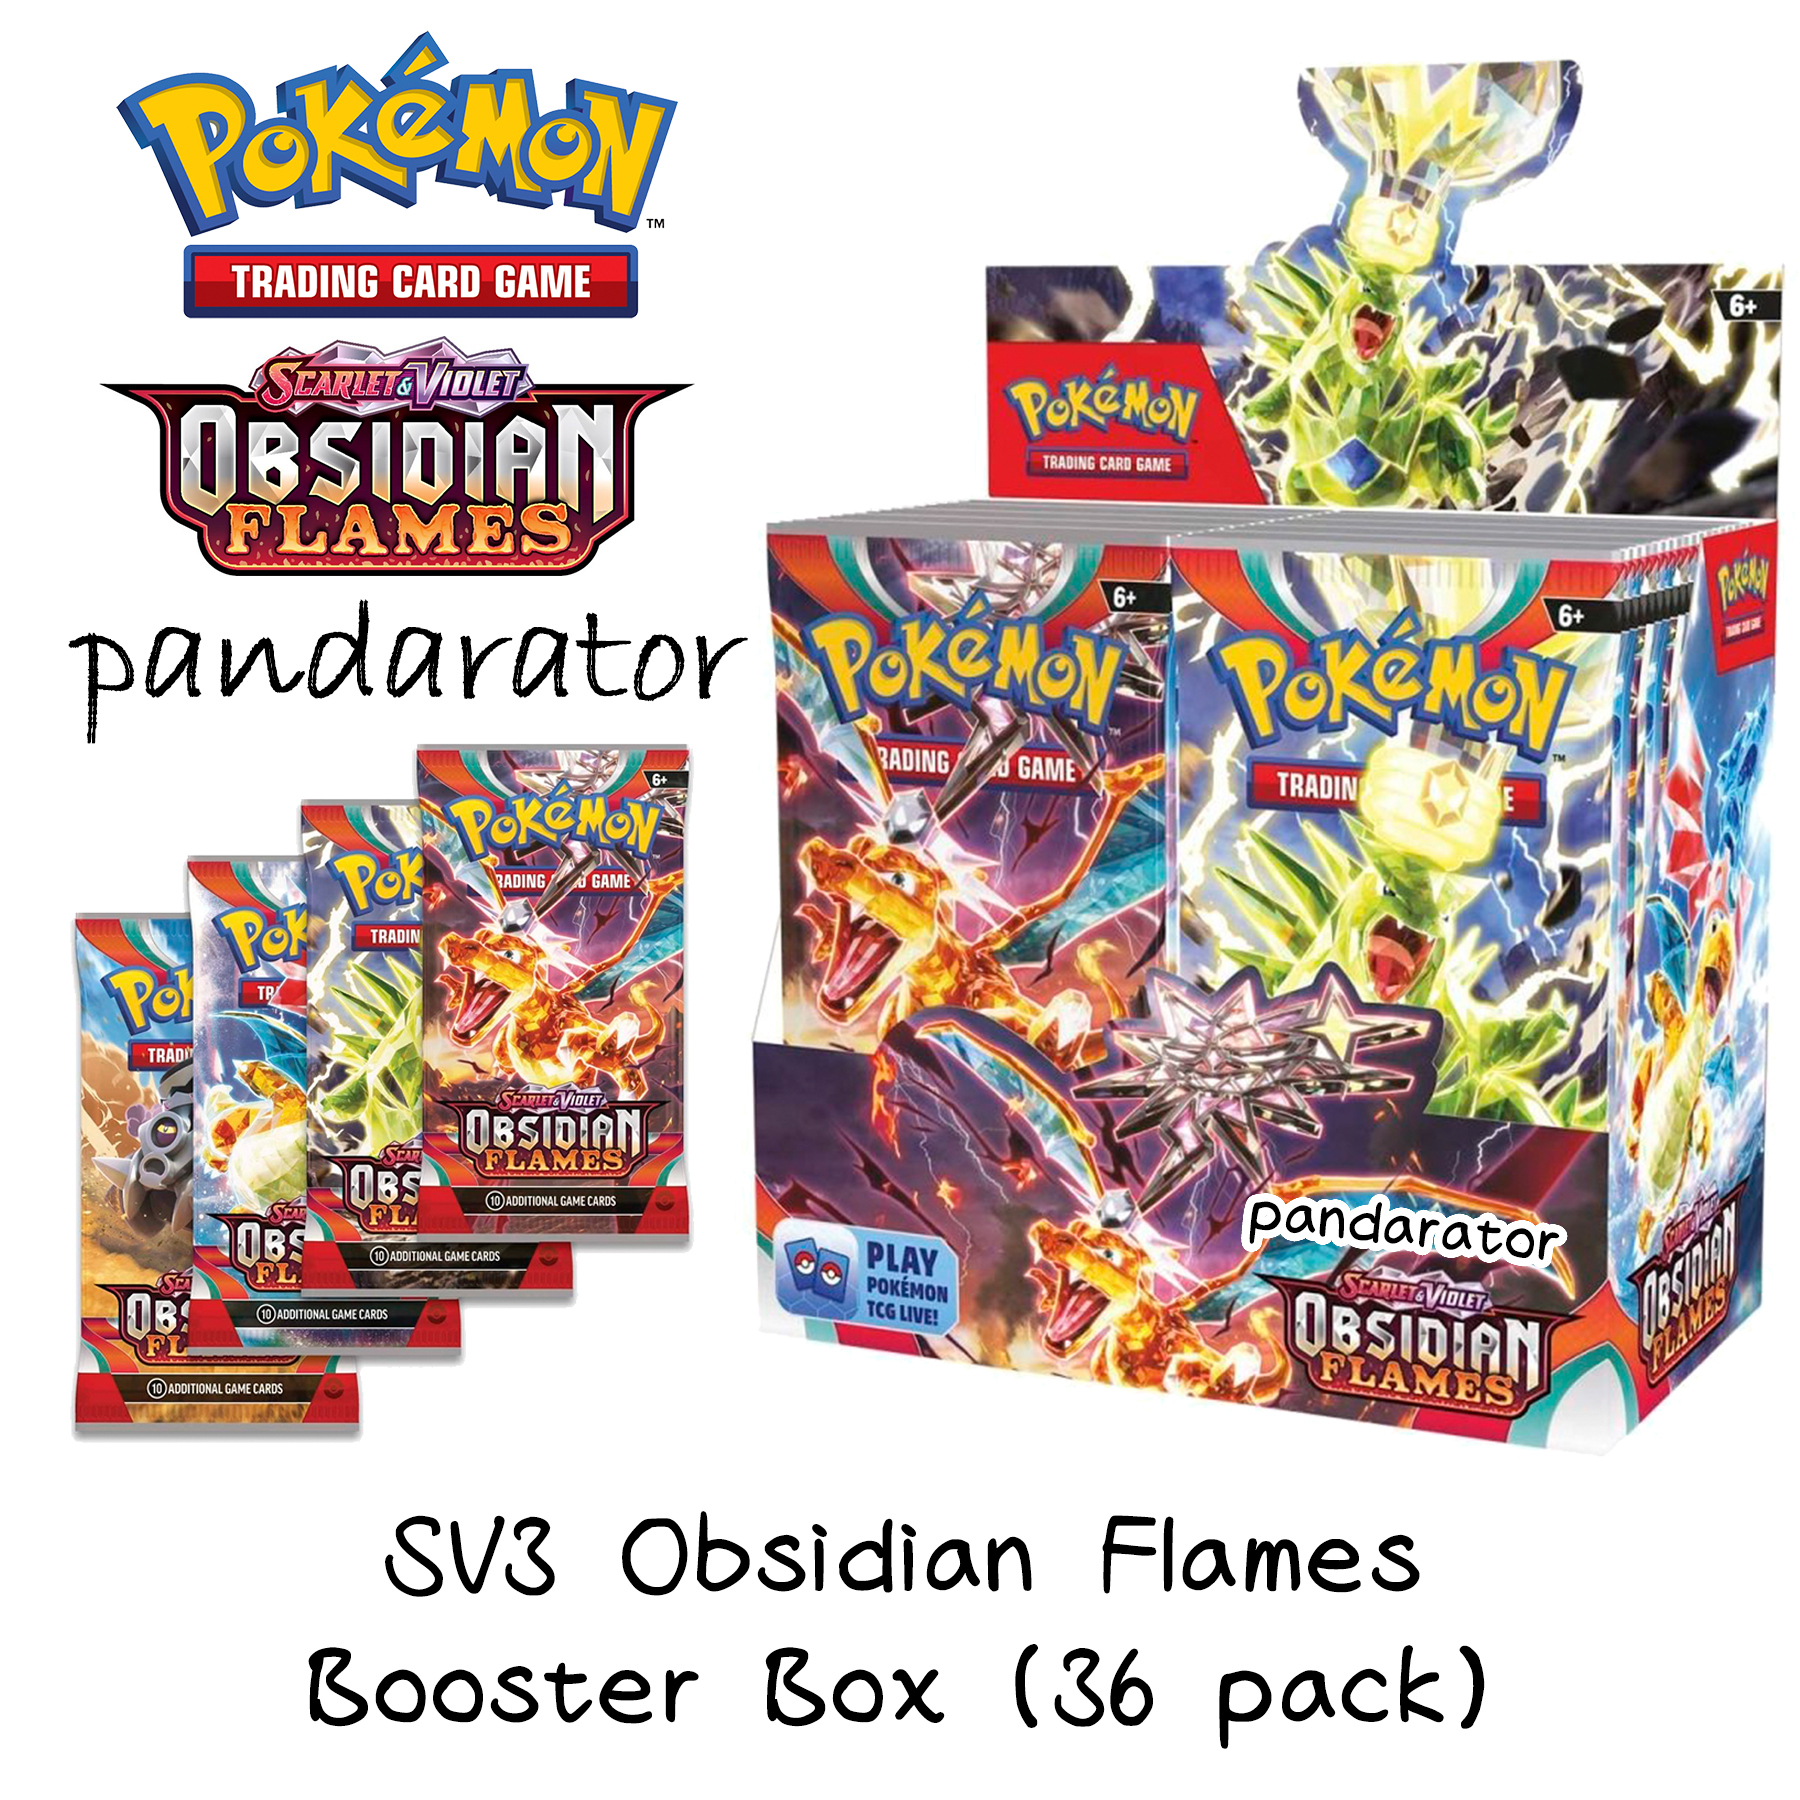 SV3 Obsidian Flames Booster Box 原盒 (36 pack)